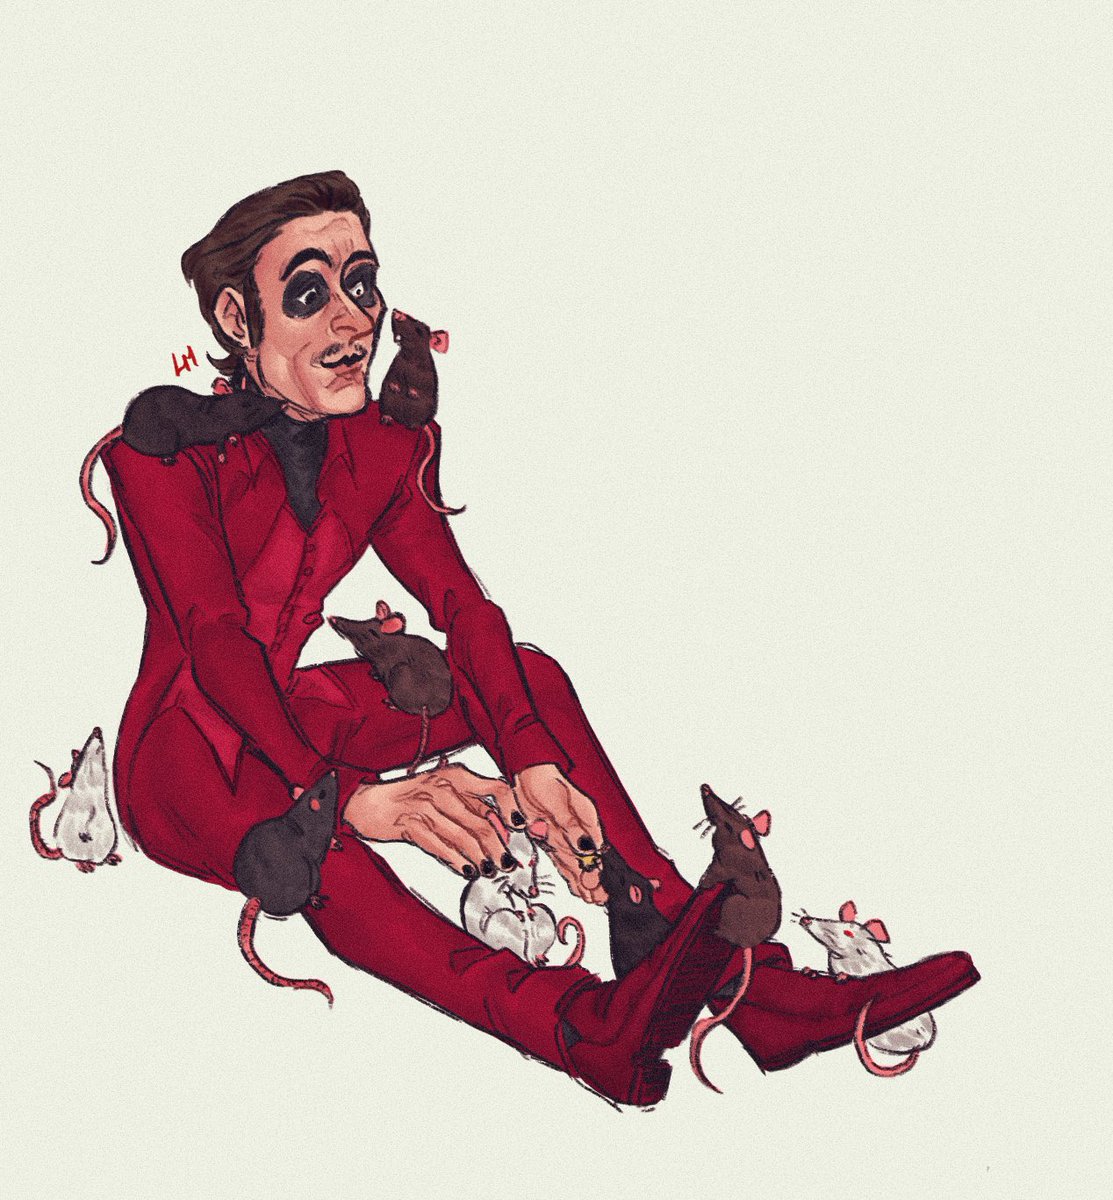 Cardinal Copia Plays With Rats While Answering Fan Questions. kier. 